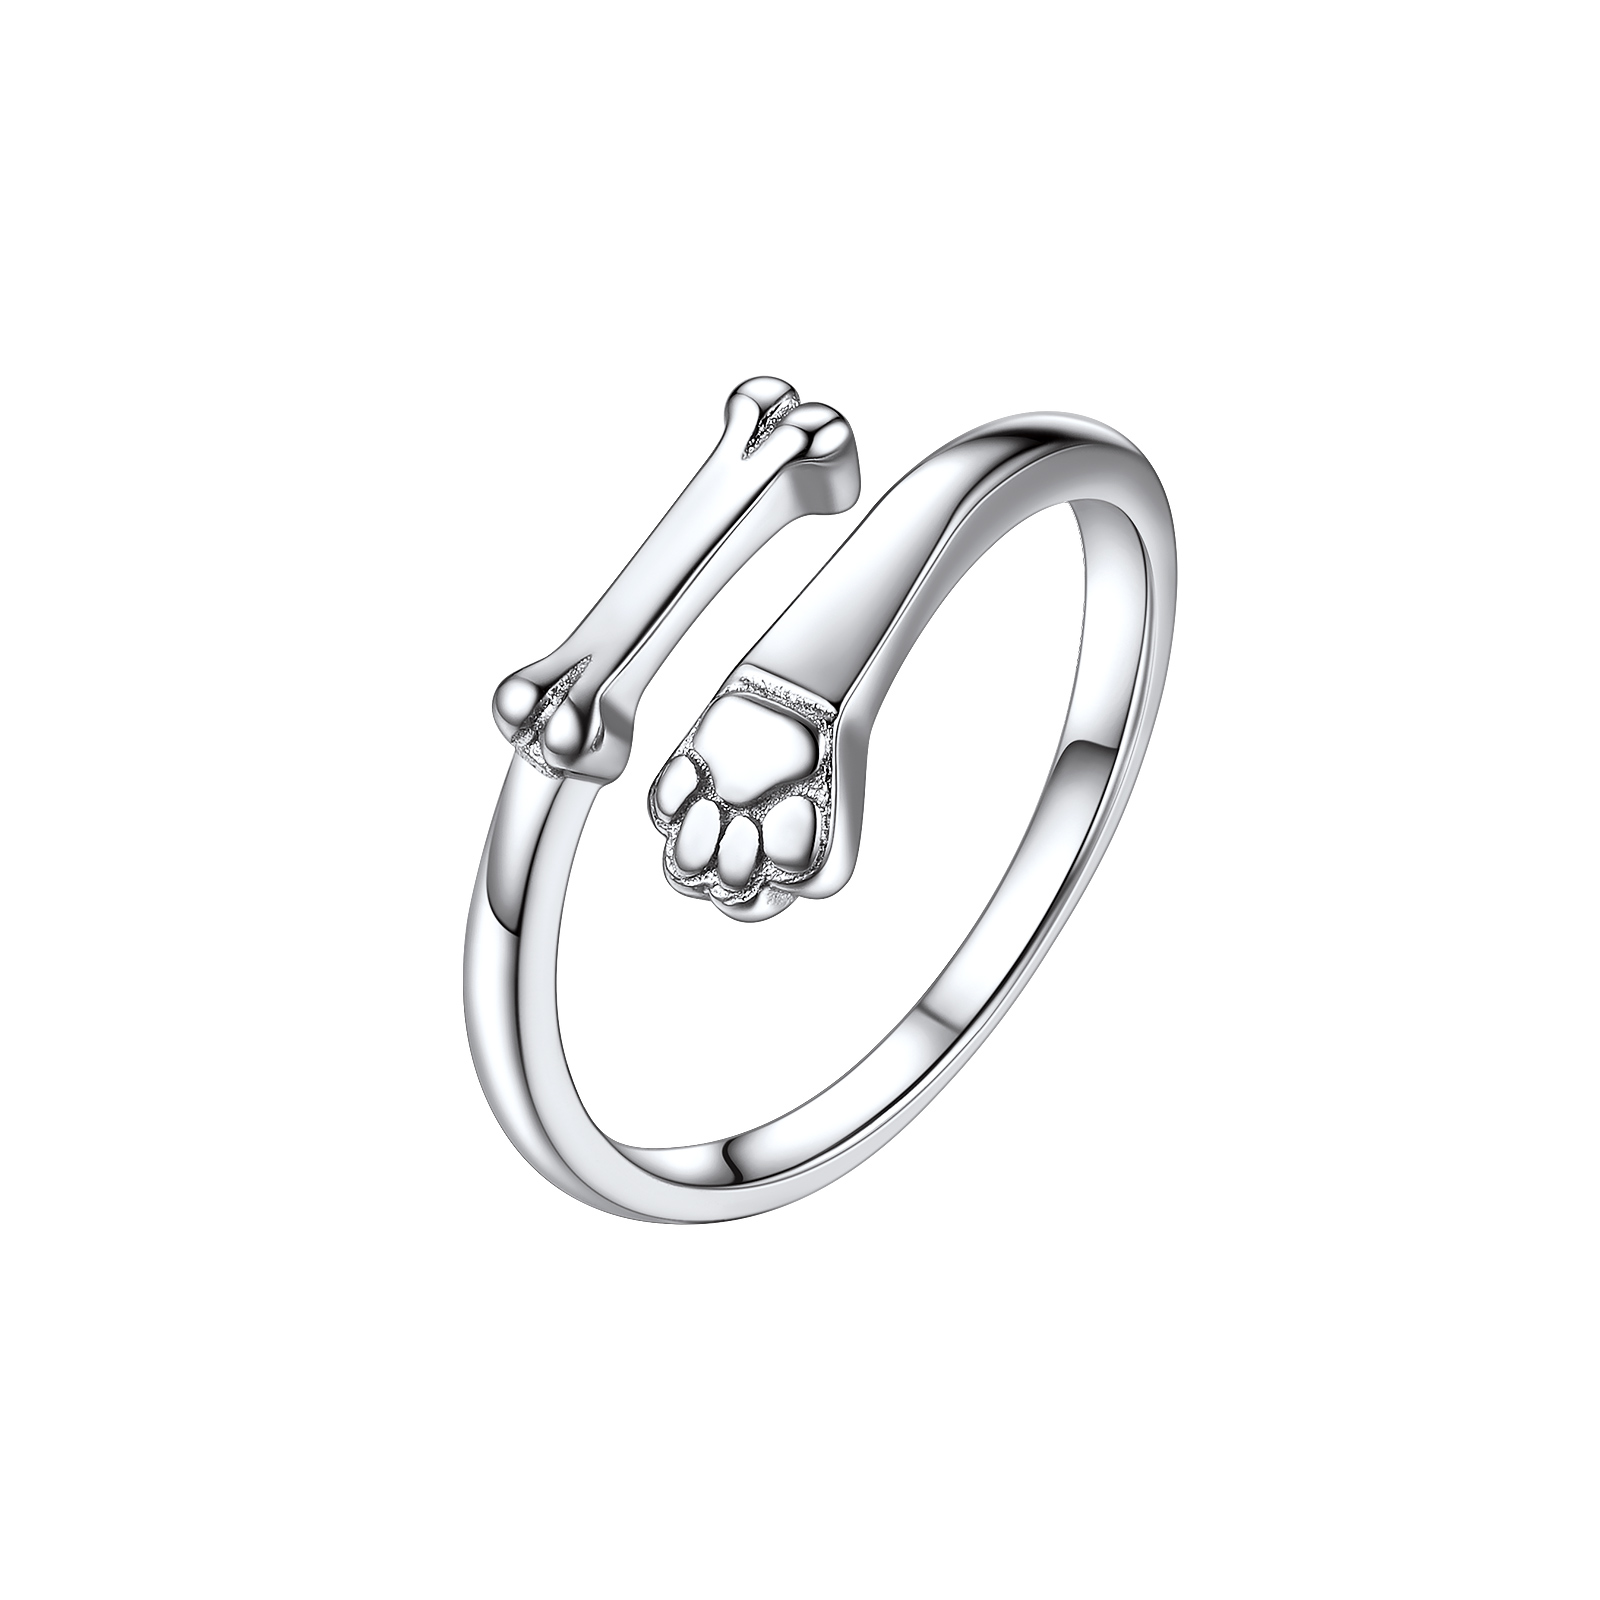 Minimalist Sterling Silver Ring Dog Paw Ring For Women